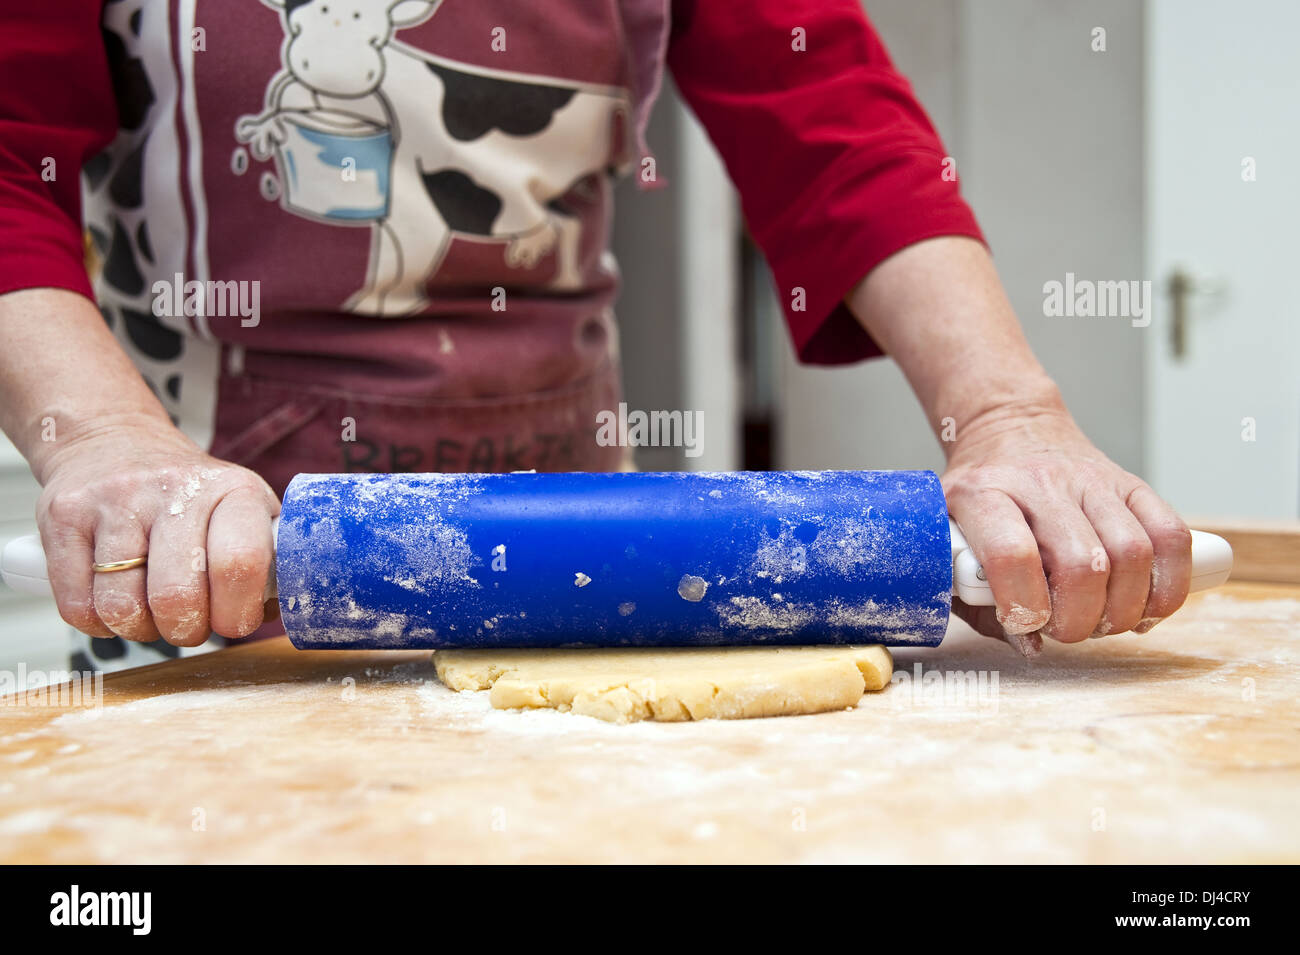 Lead hands and rolling pin roll out dough Stock Photo